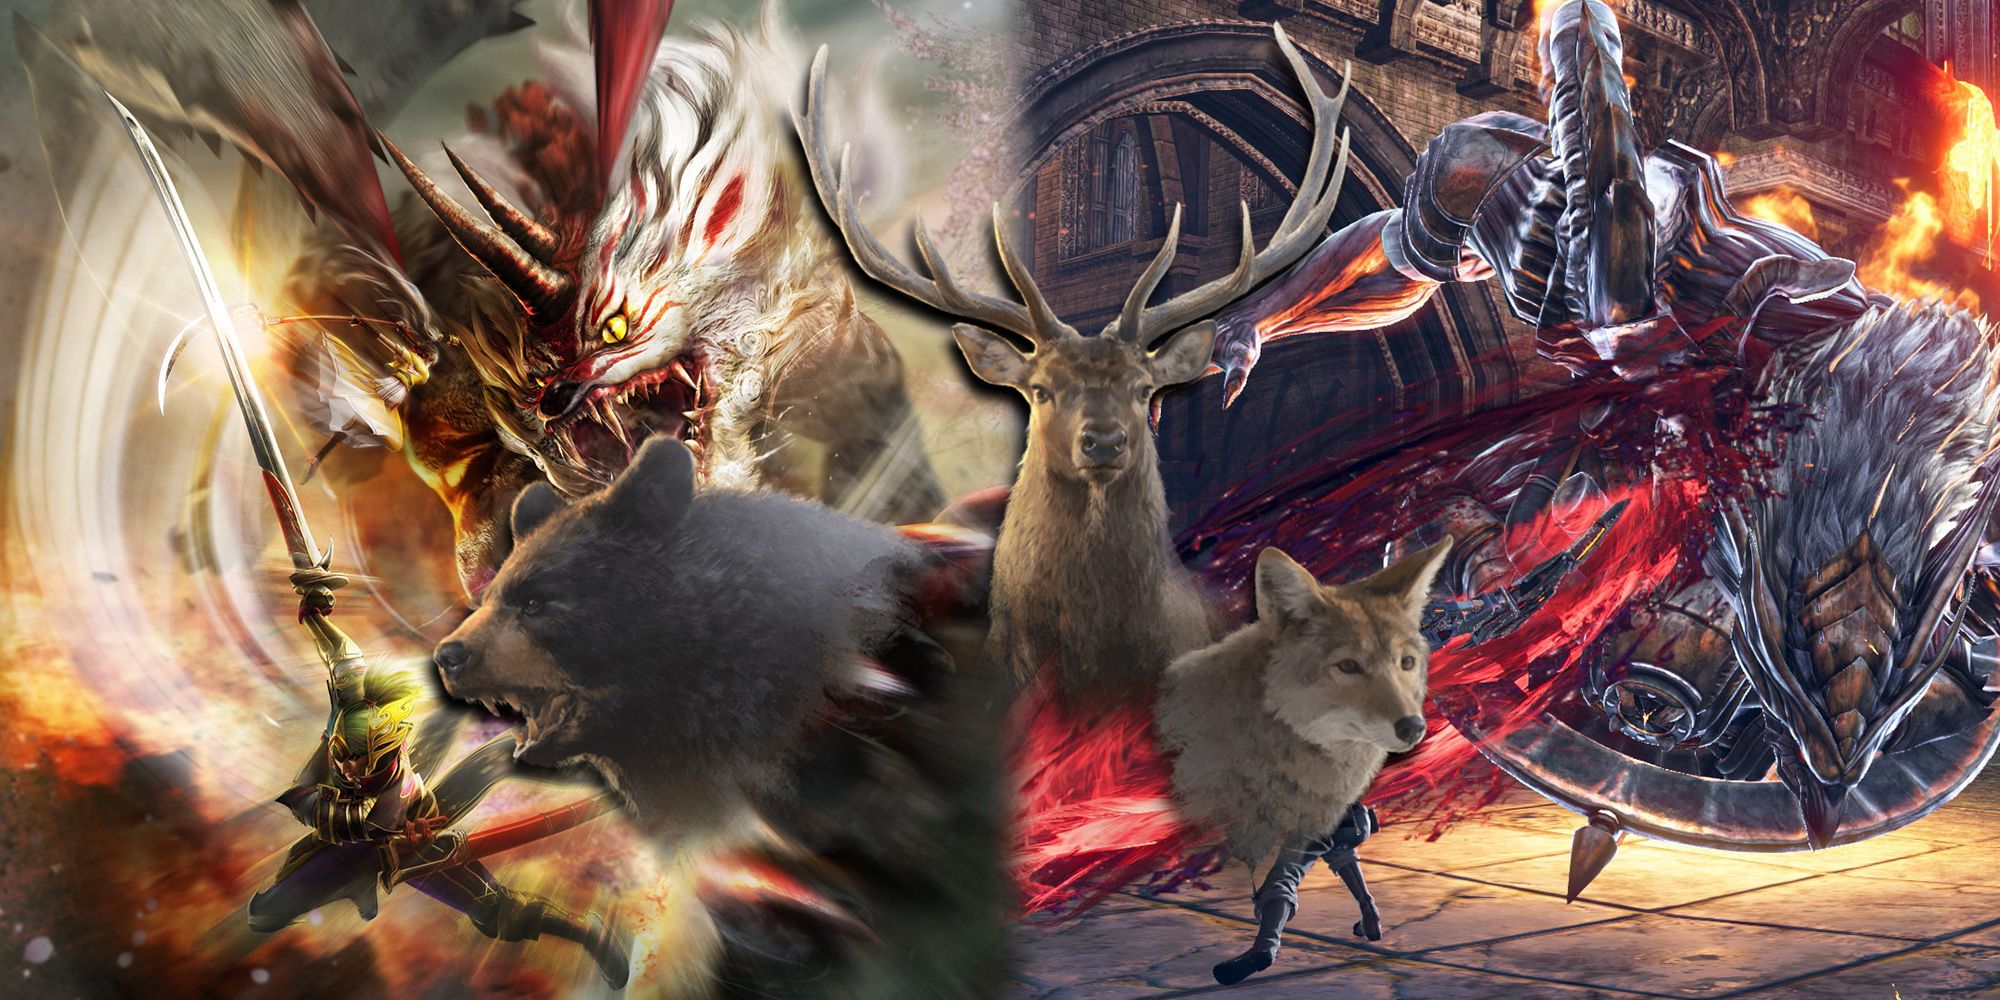 Monster Hunter: 12 Other Games That Let You Hunt Beasts